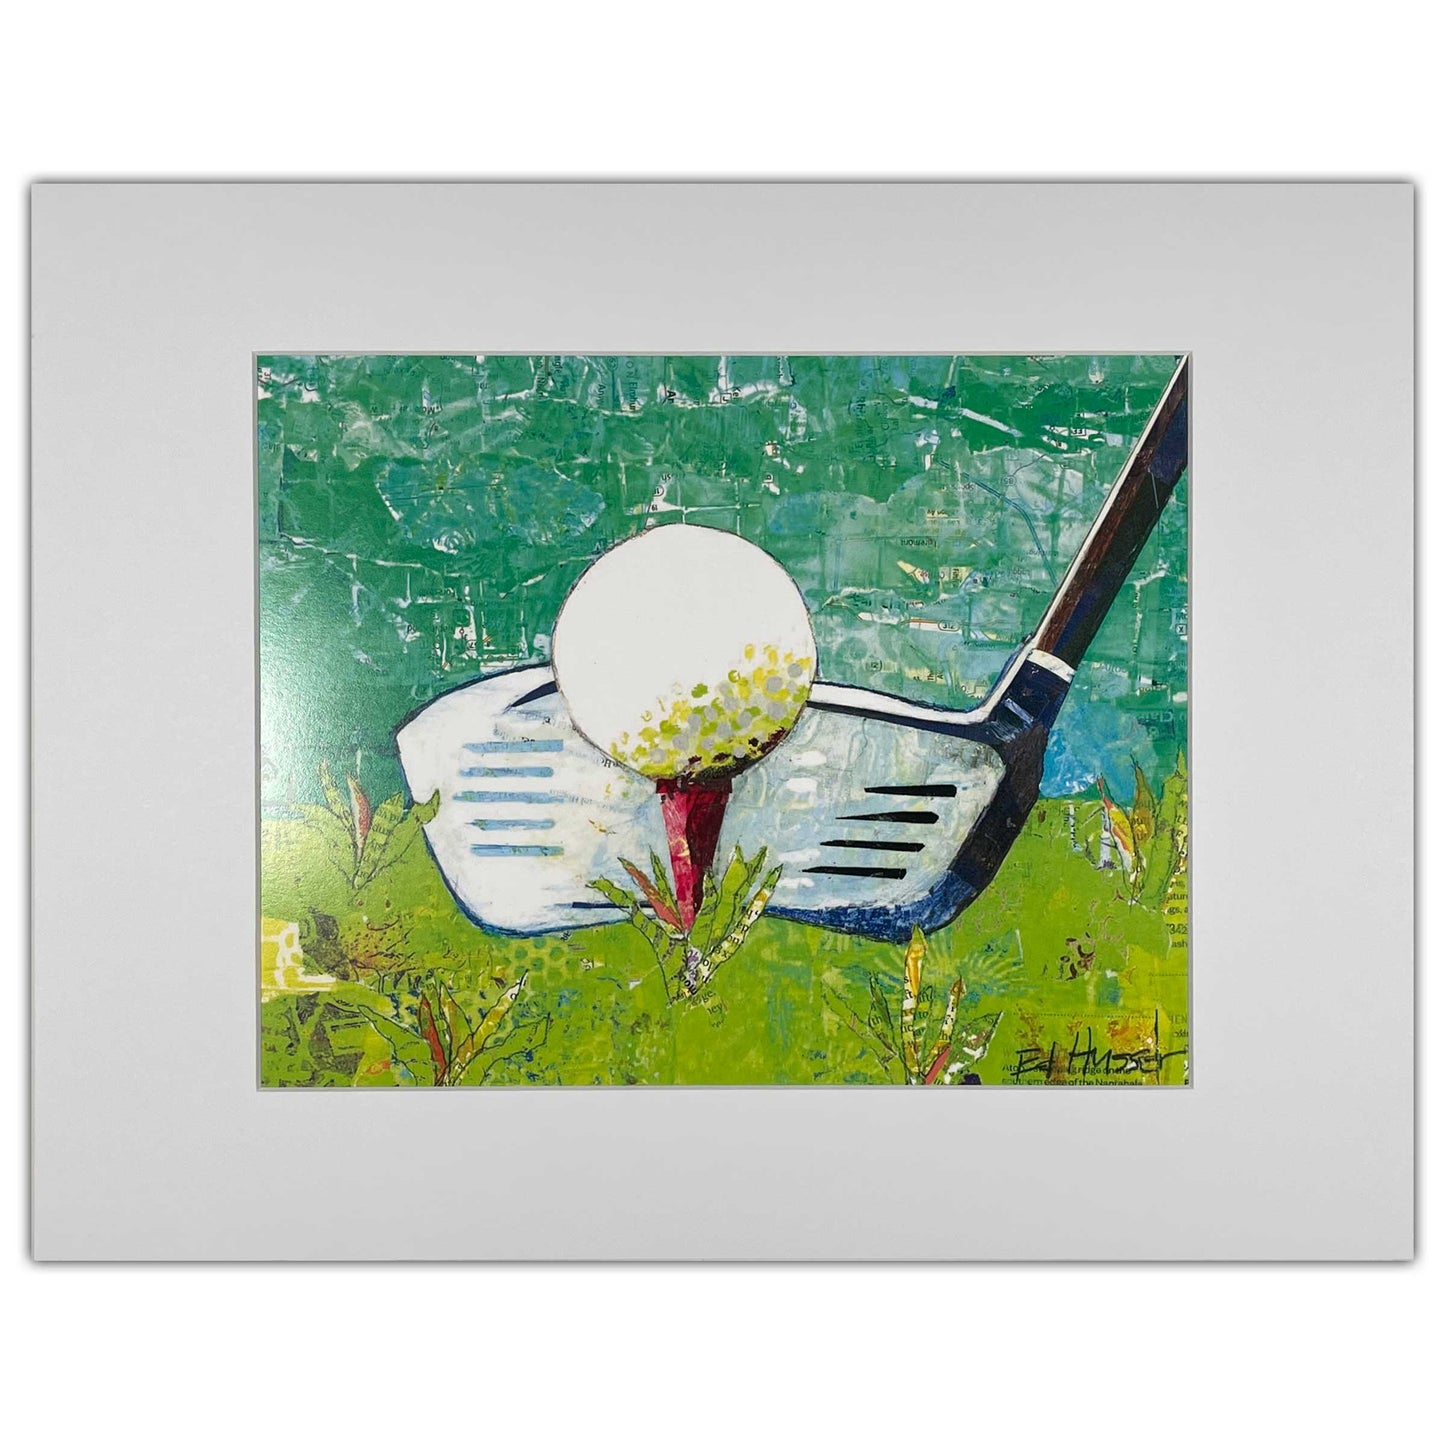 tee time collage print, golf art, golf ball, putter, putting green, paper collage, collage art